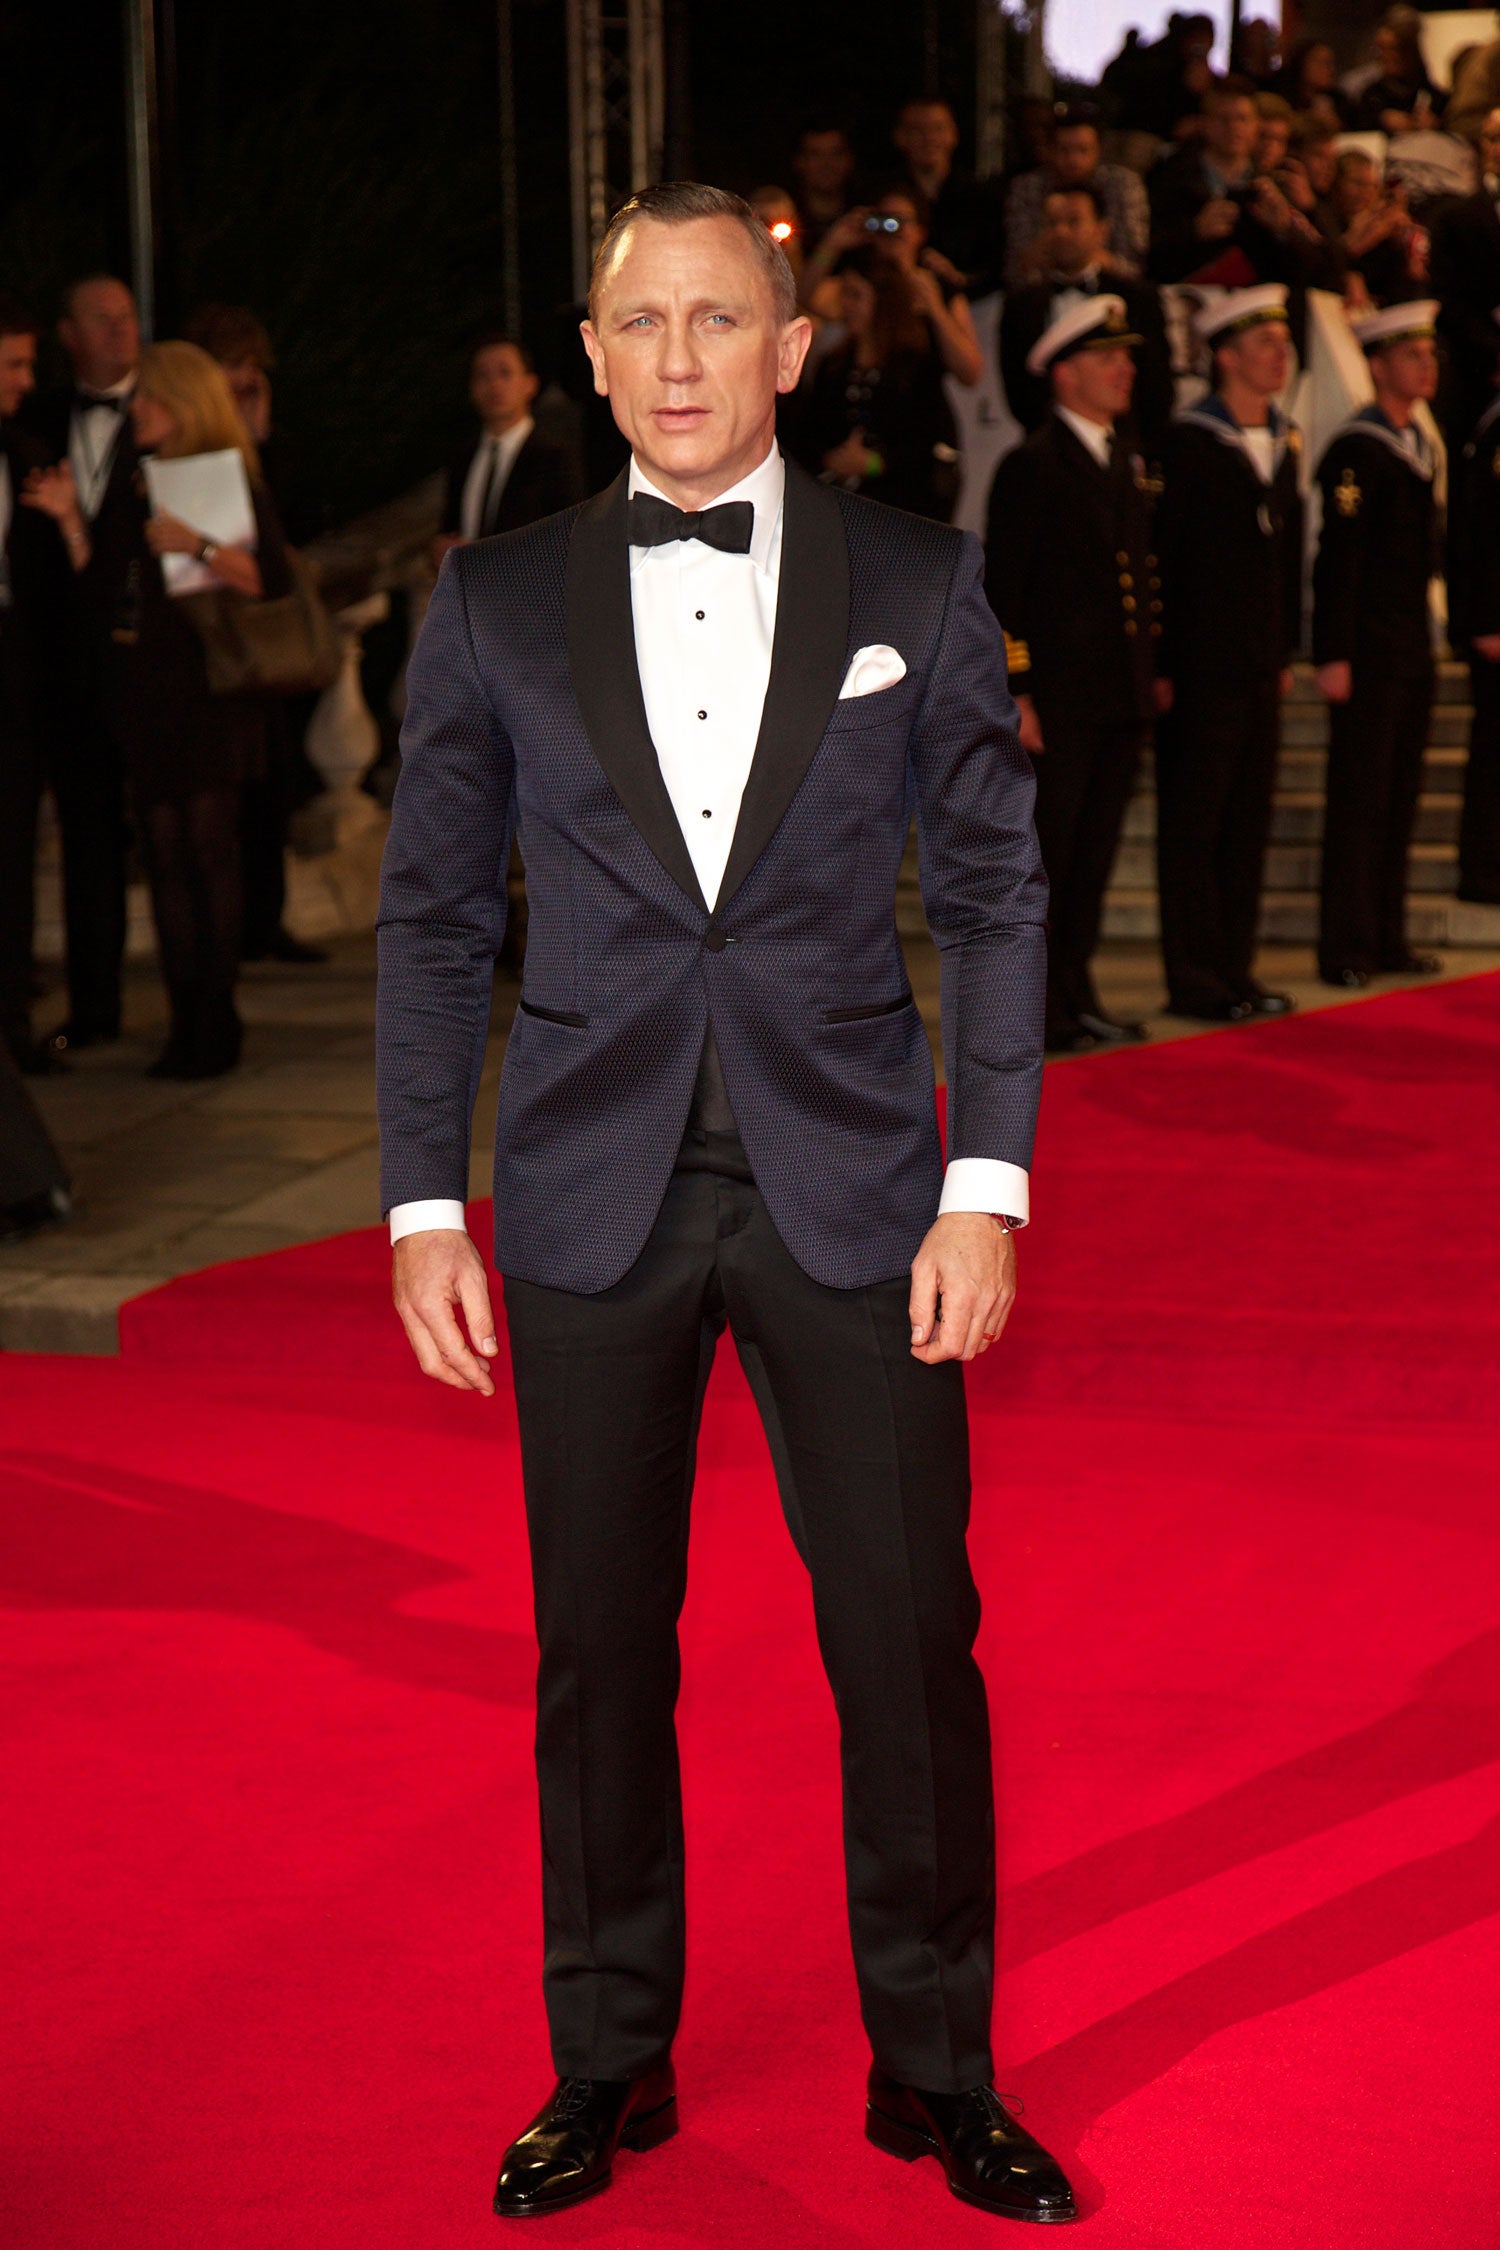 The Official James Bond 007 Website | SKYFALL World Premiere Photos And ...